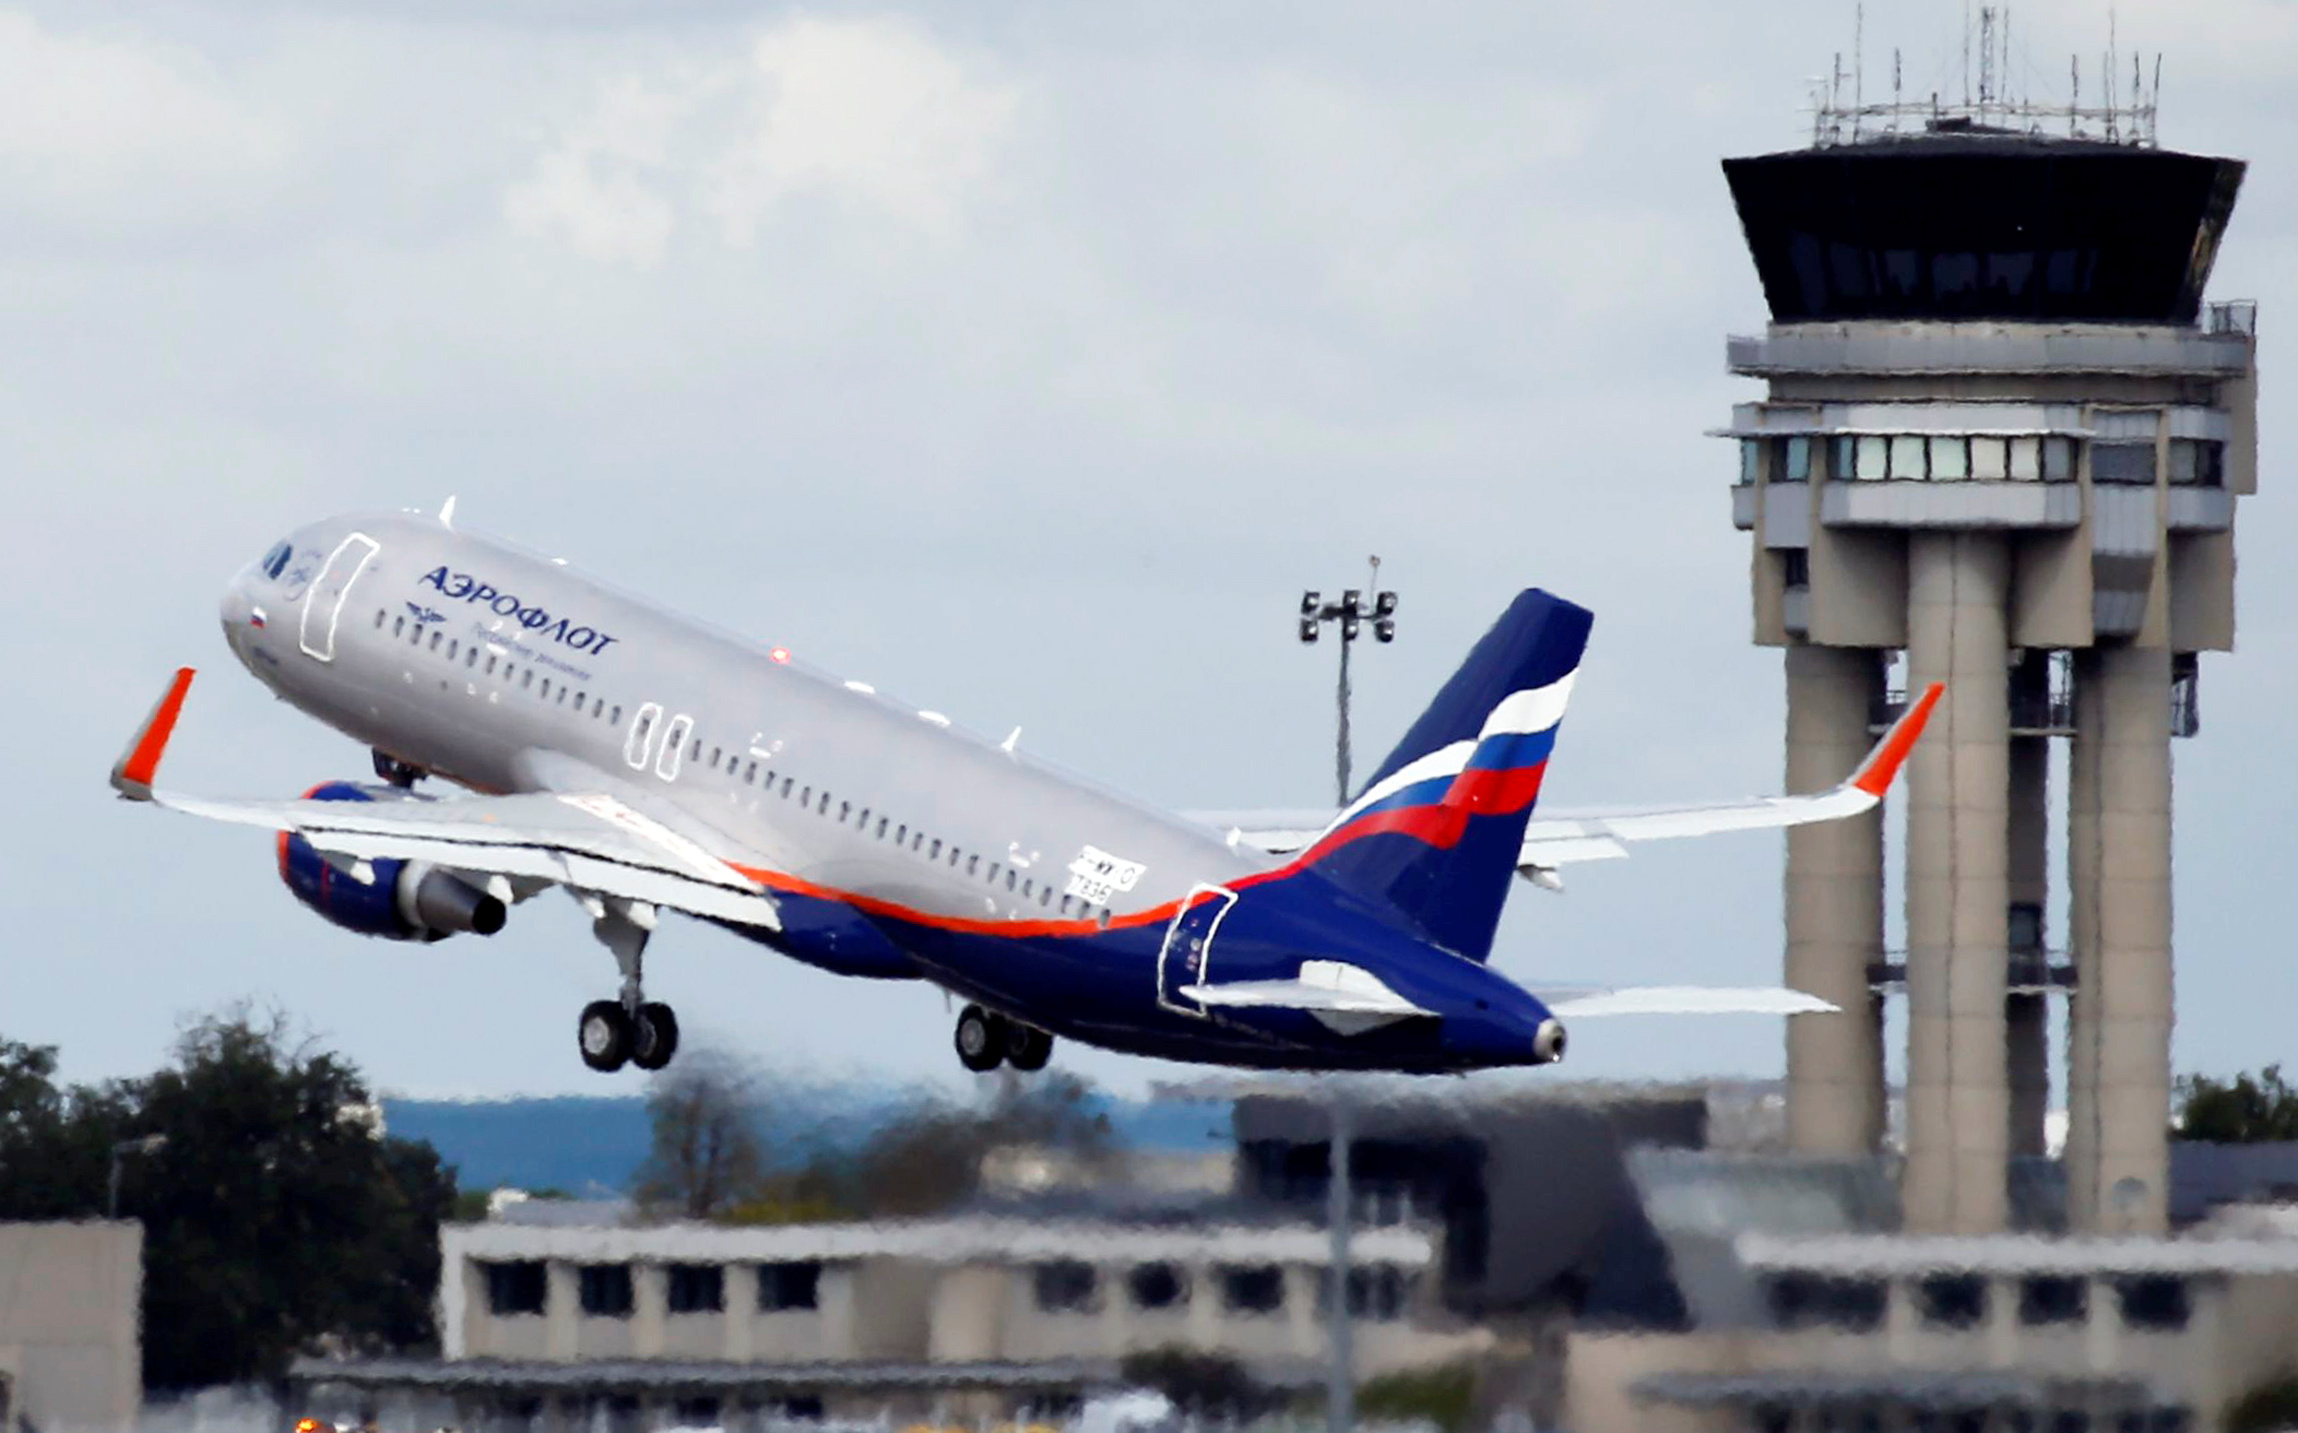 An Airbus A320-200 of Russia's flagship airline Aeroflot takes off in Colomiers at the Toulouse-Blagnac airport